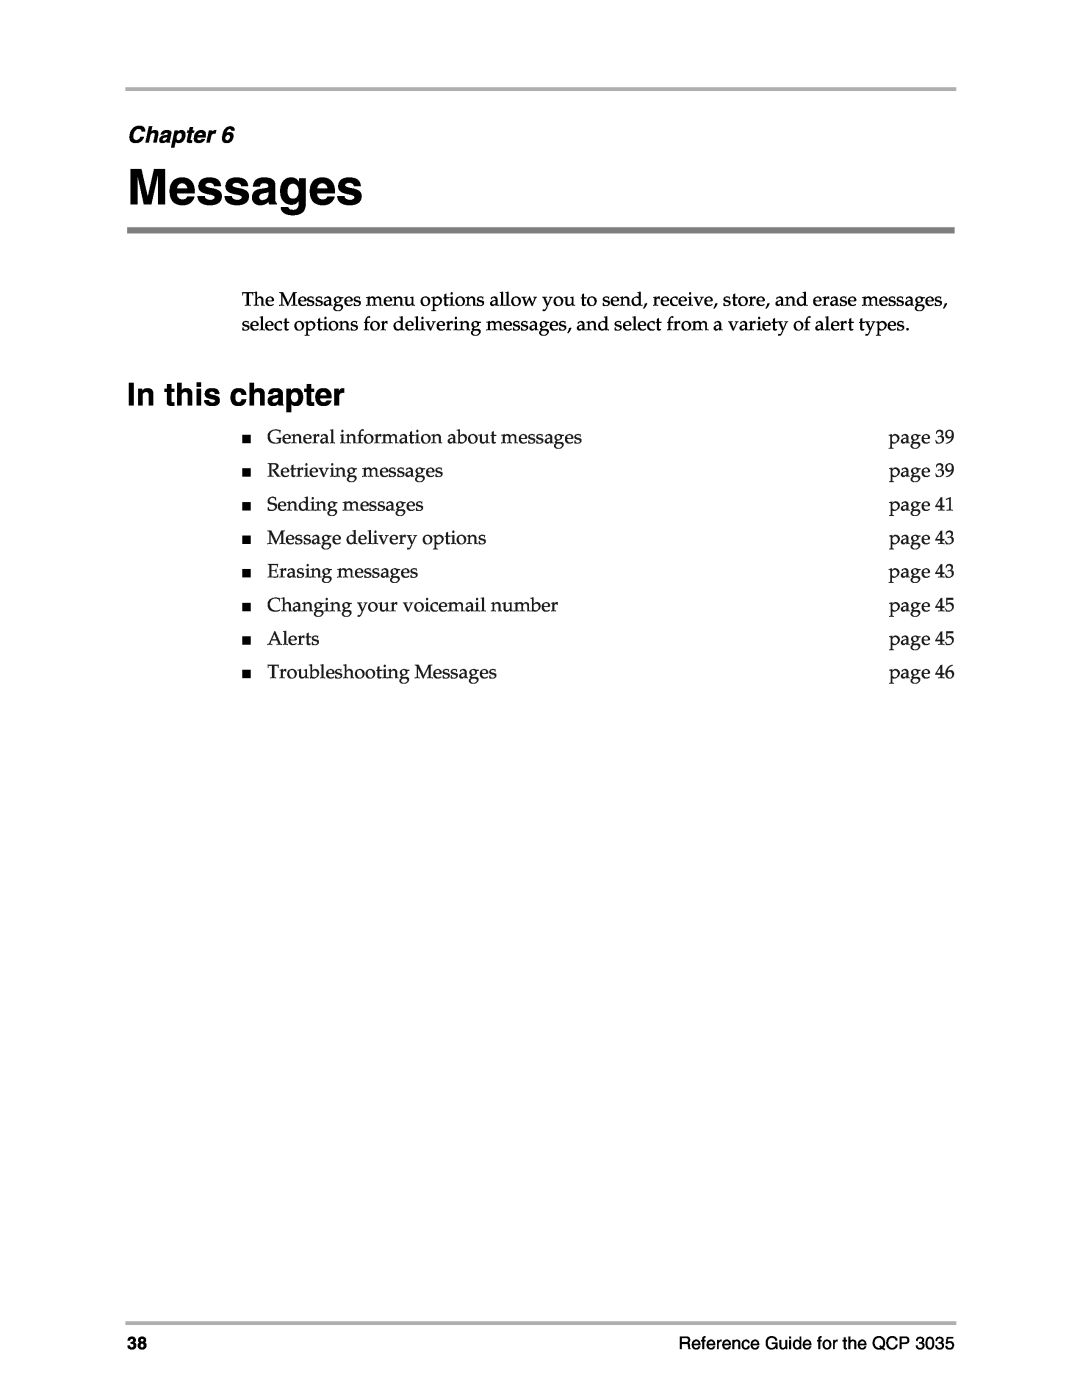 Kyocera 3035 Messages, In this chapter, Chapter, General information about messages, page, Retrieving messages, Alerts 